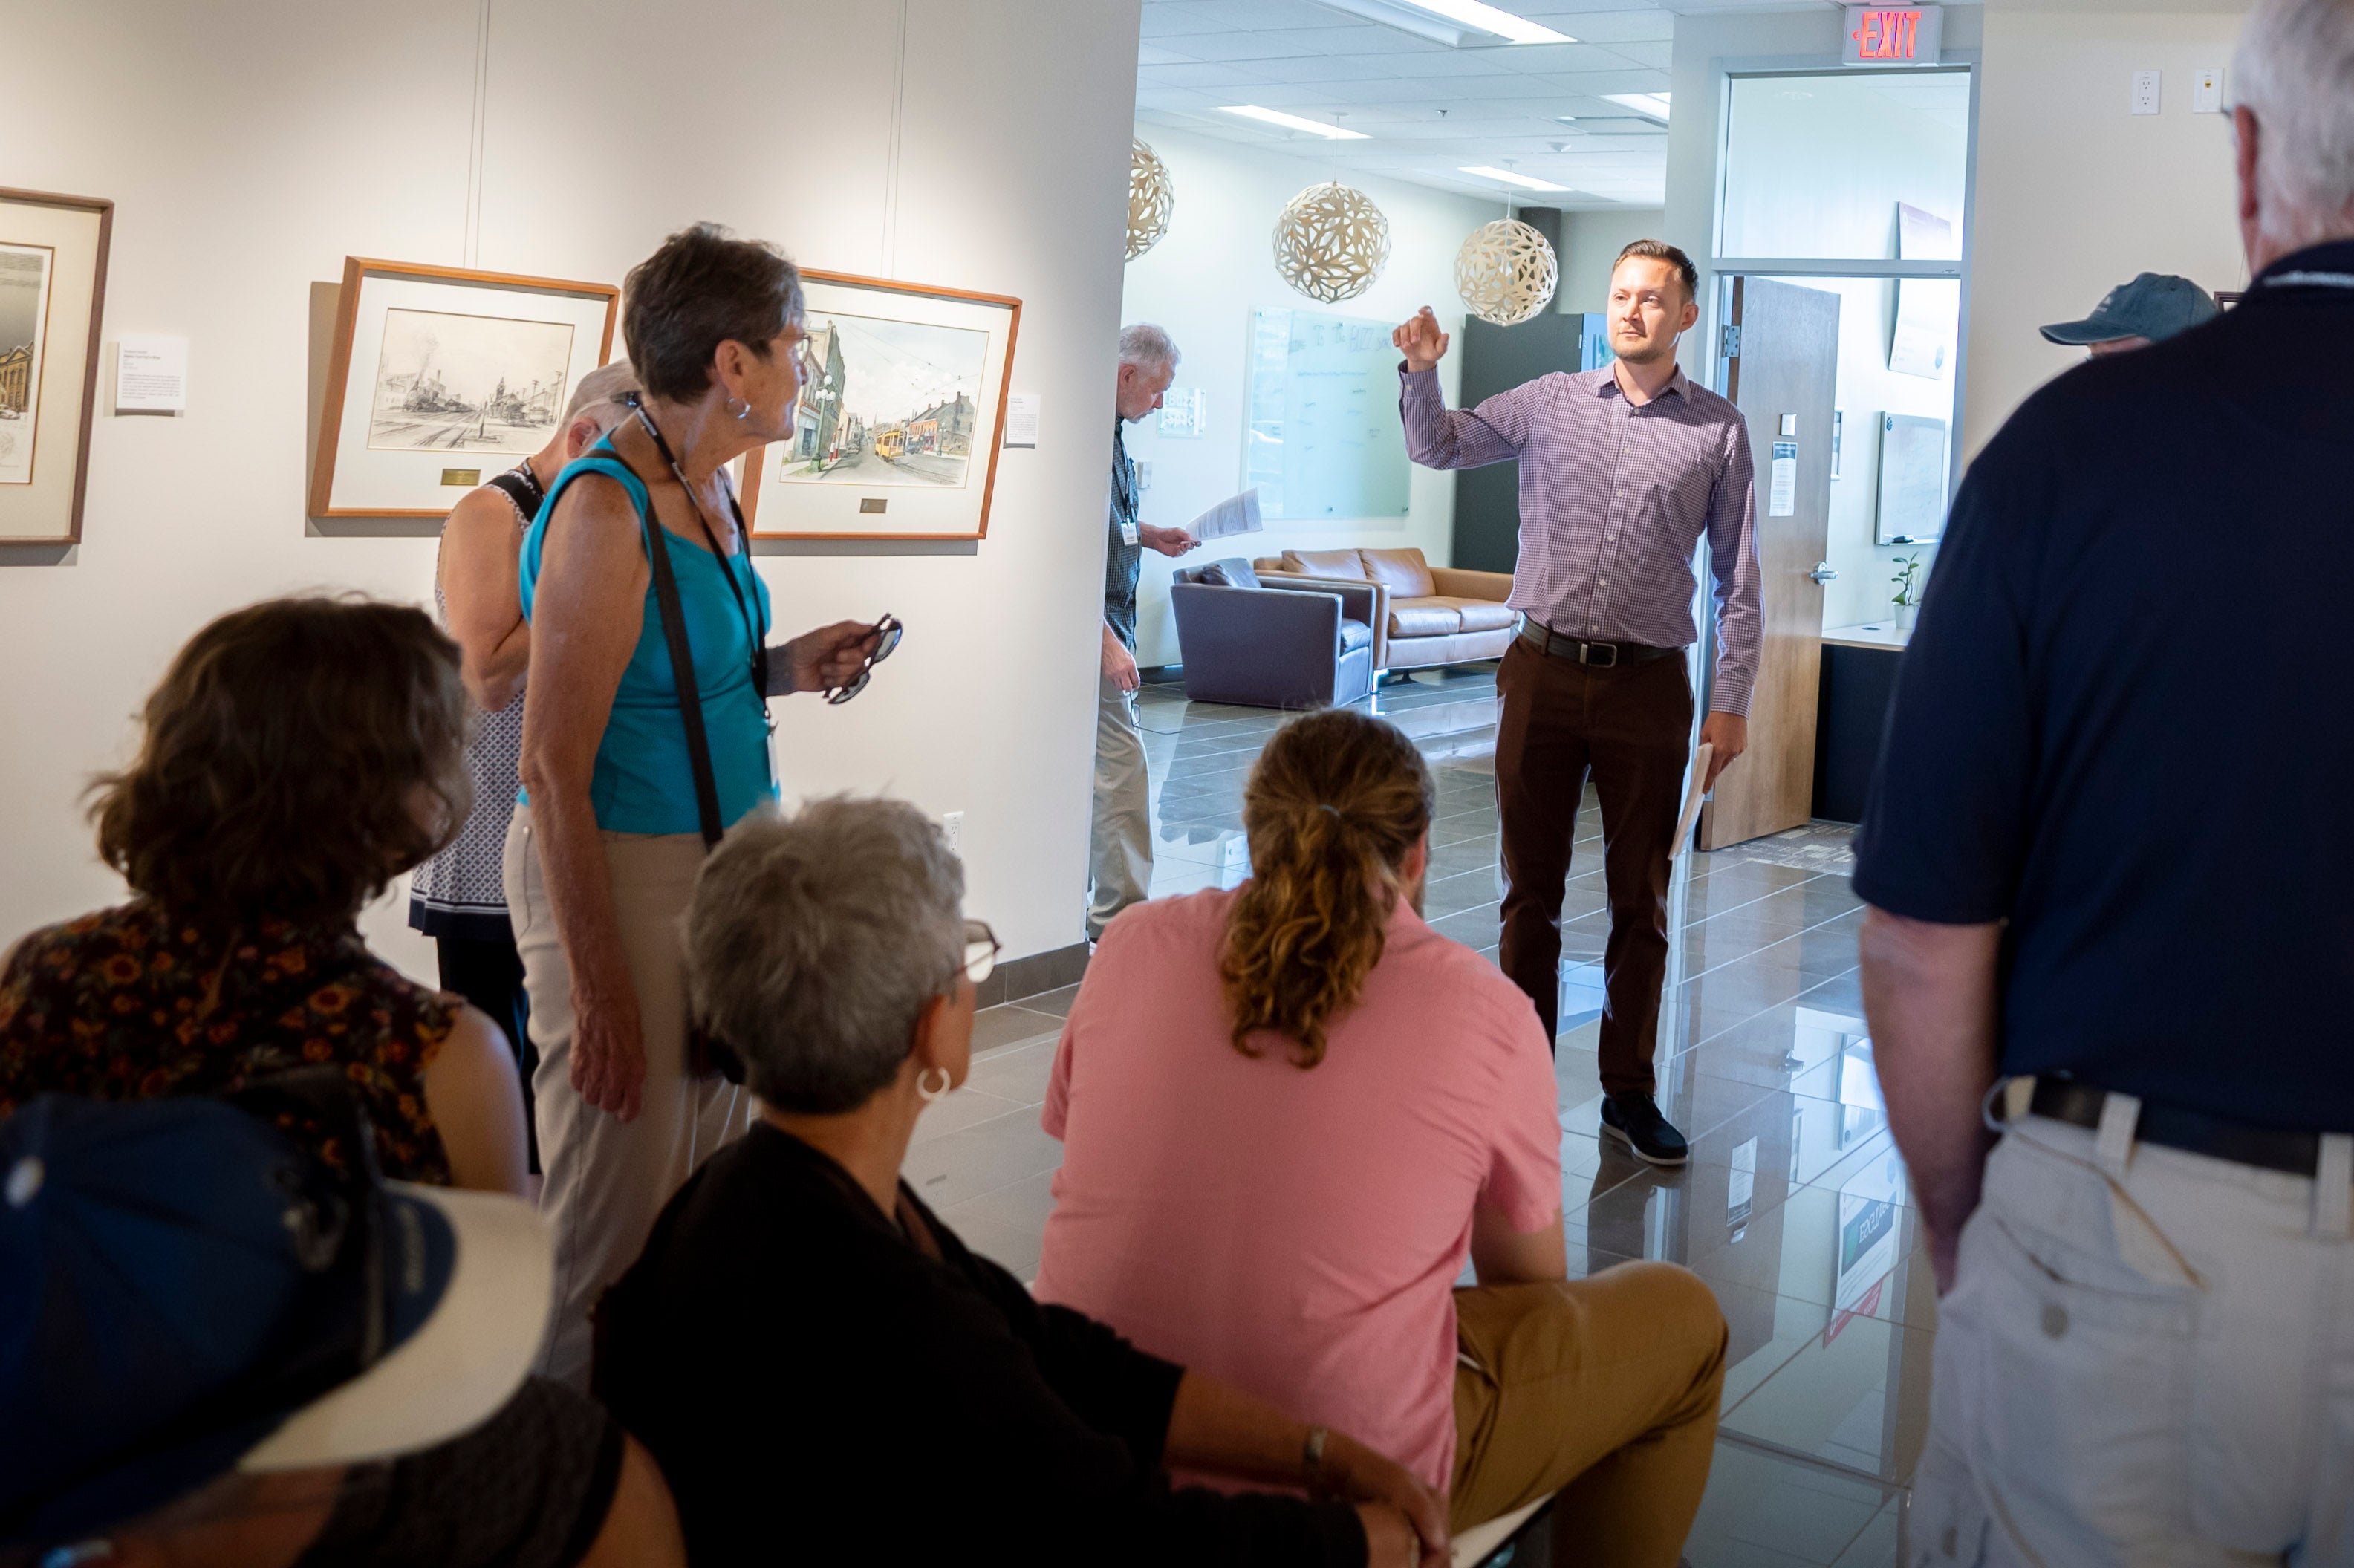 David Neufeld speaks to a tour group in the Grebel Gallery